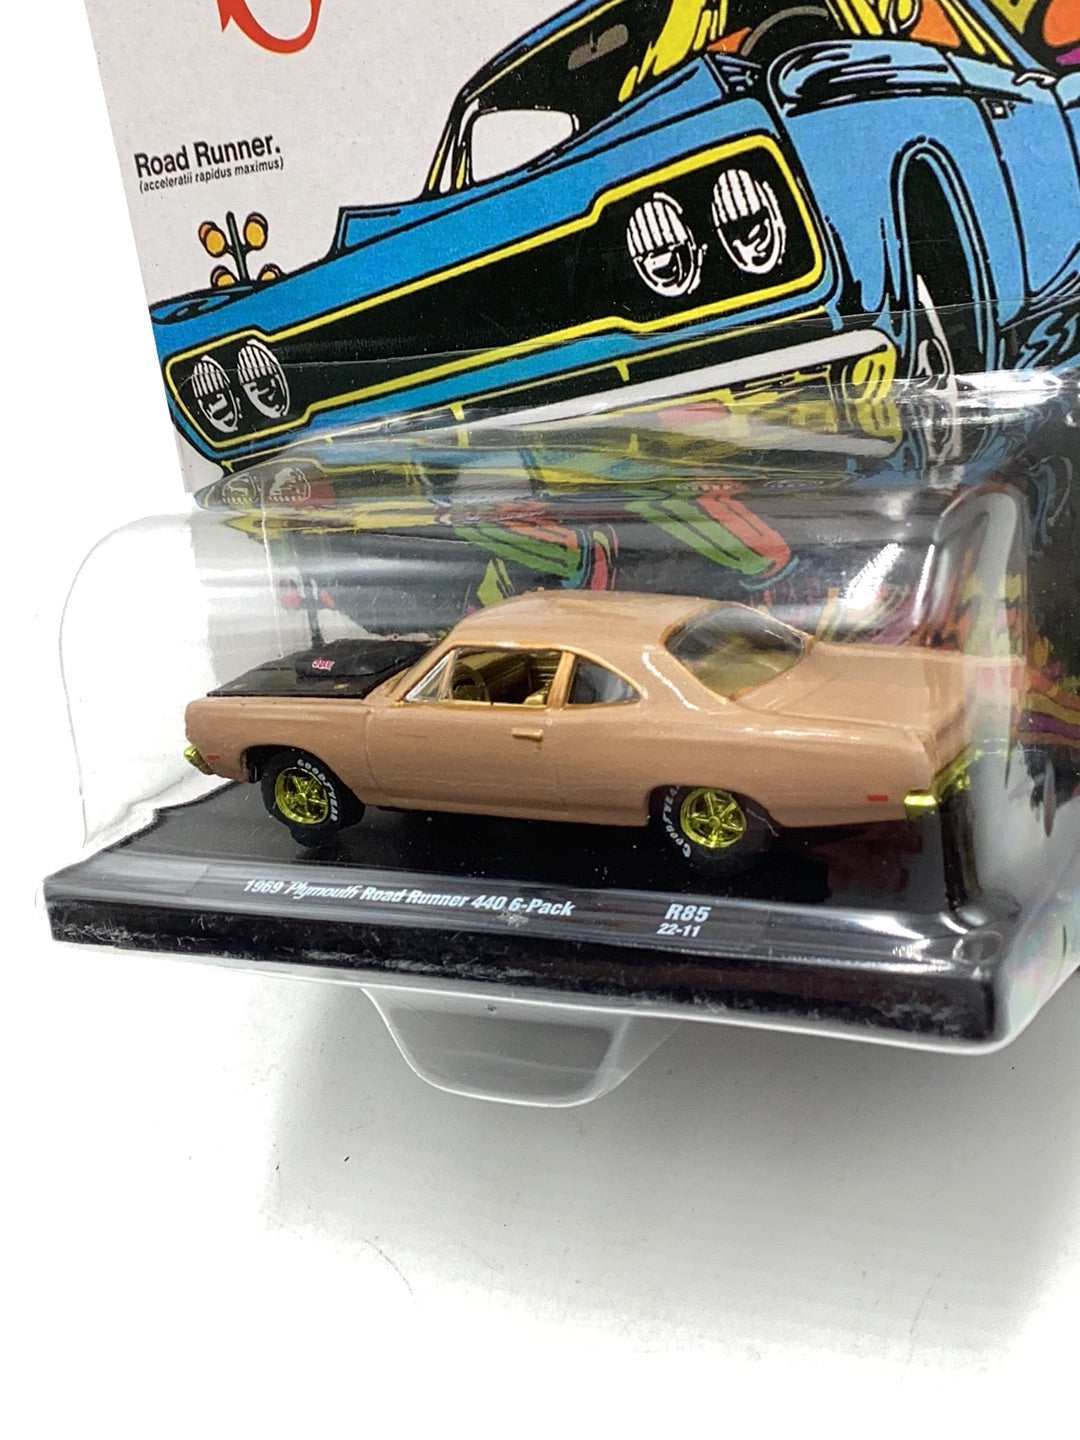 M2 Machines auto-drivers 1969 Plymouth Road Runner 440 6-pack R85 Chases